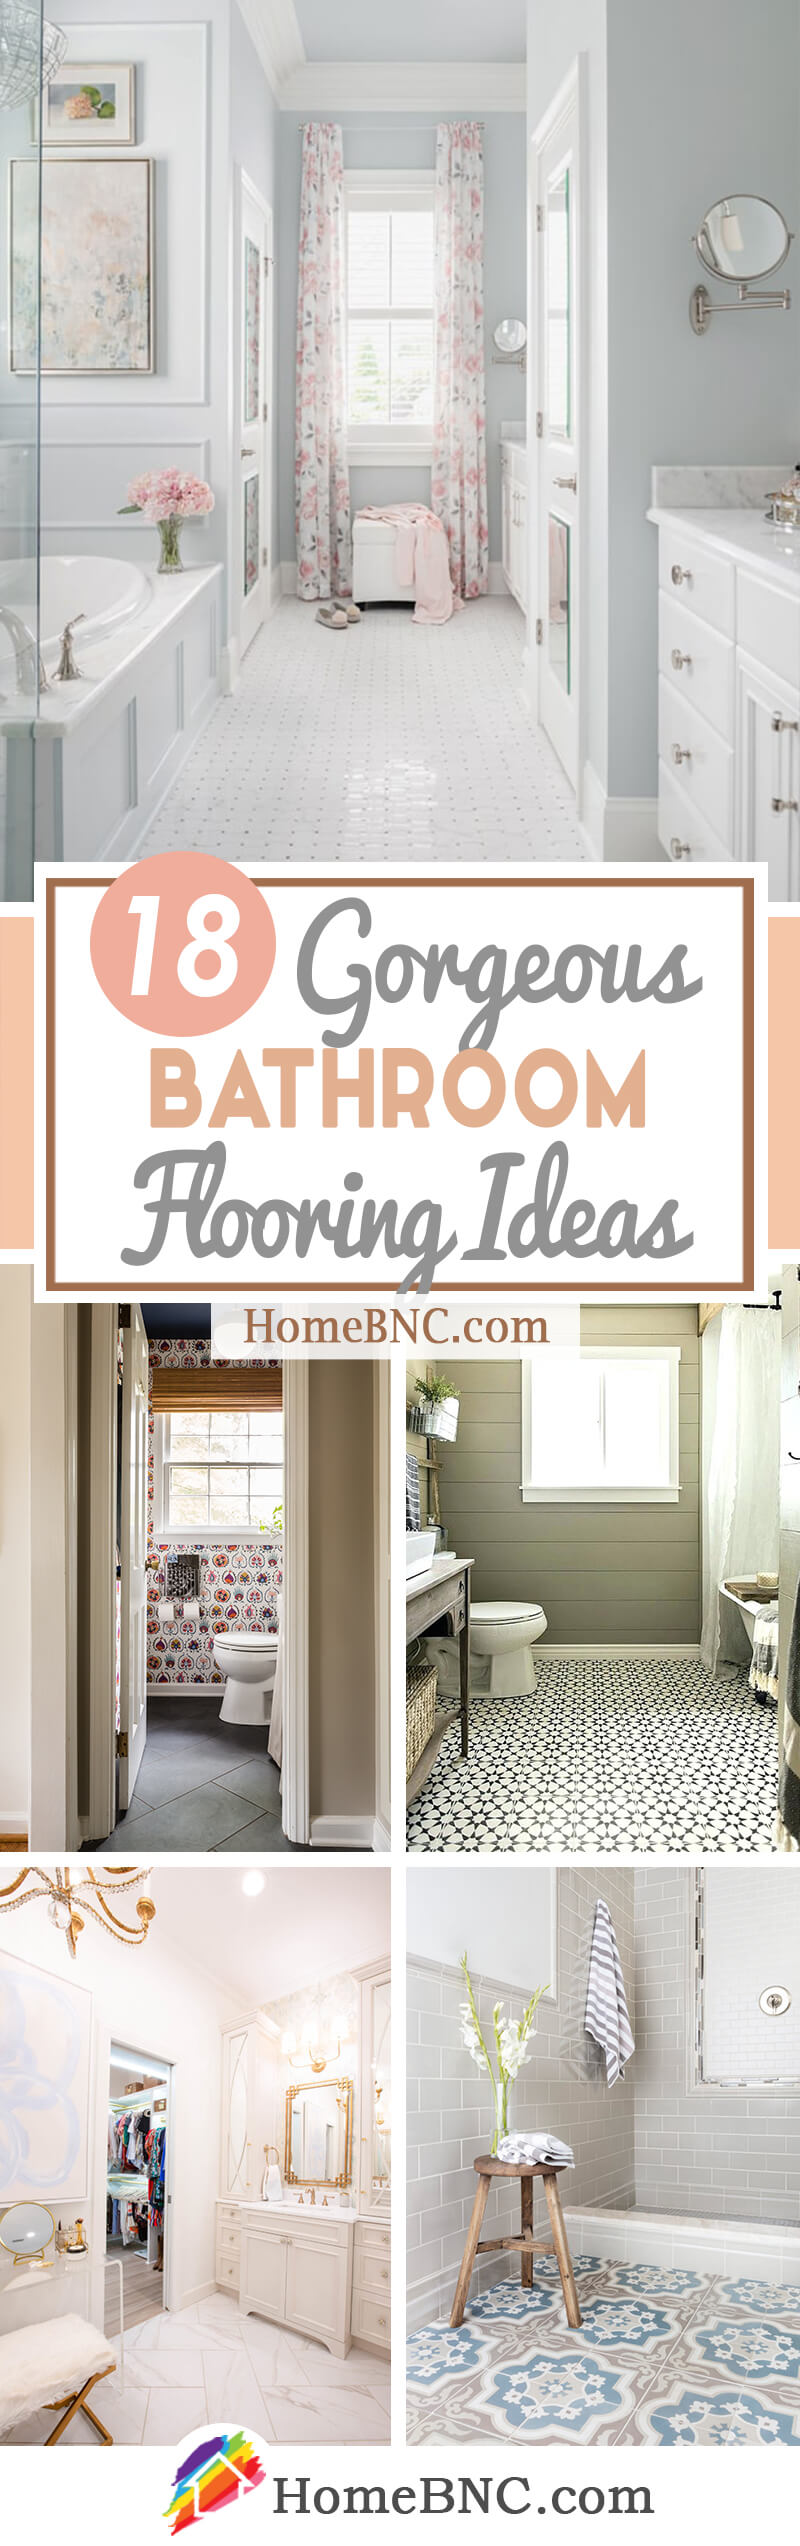 18 Best Bathroom Flooring Ideas And Designs For 2020,Beautiful Pink Rose Flower Images Free Download